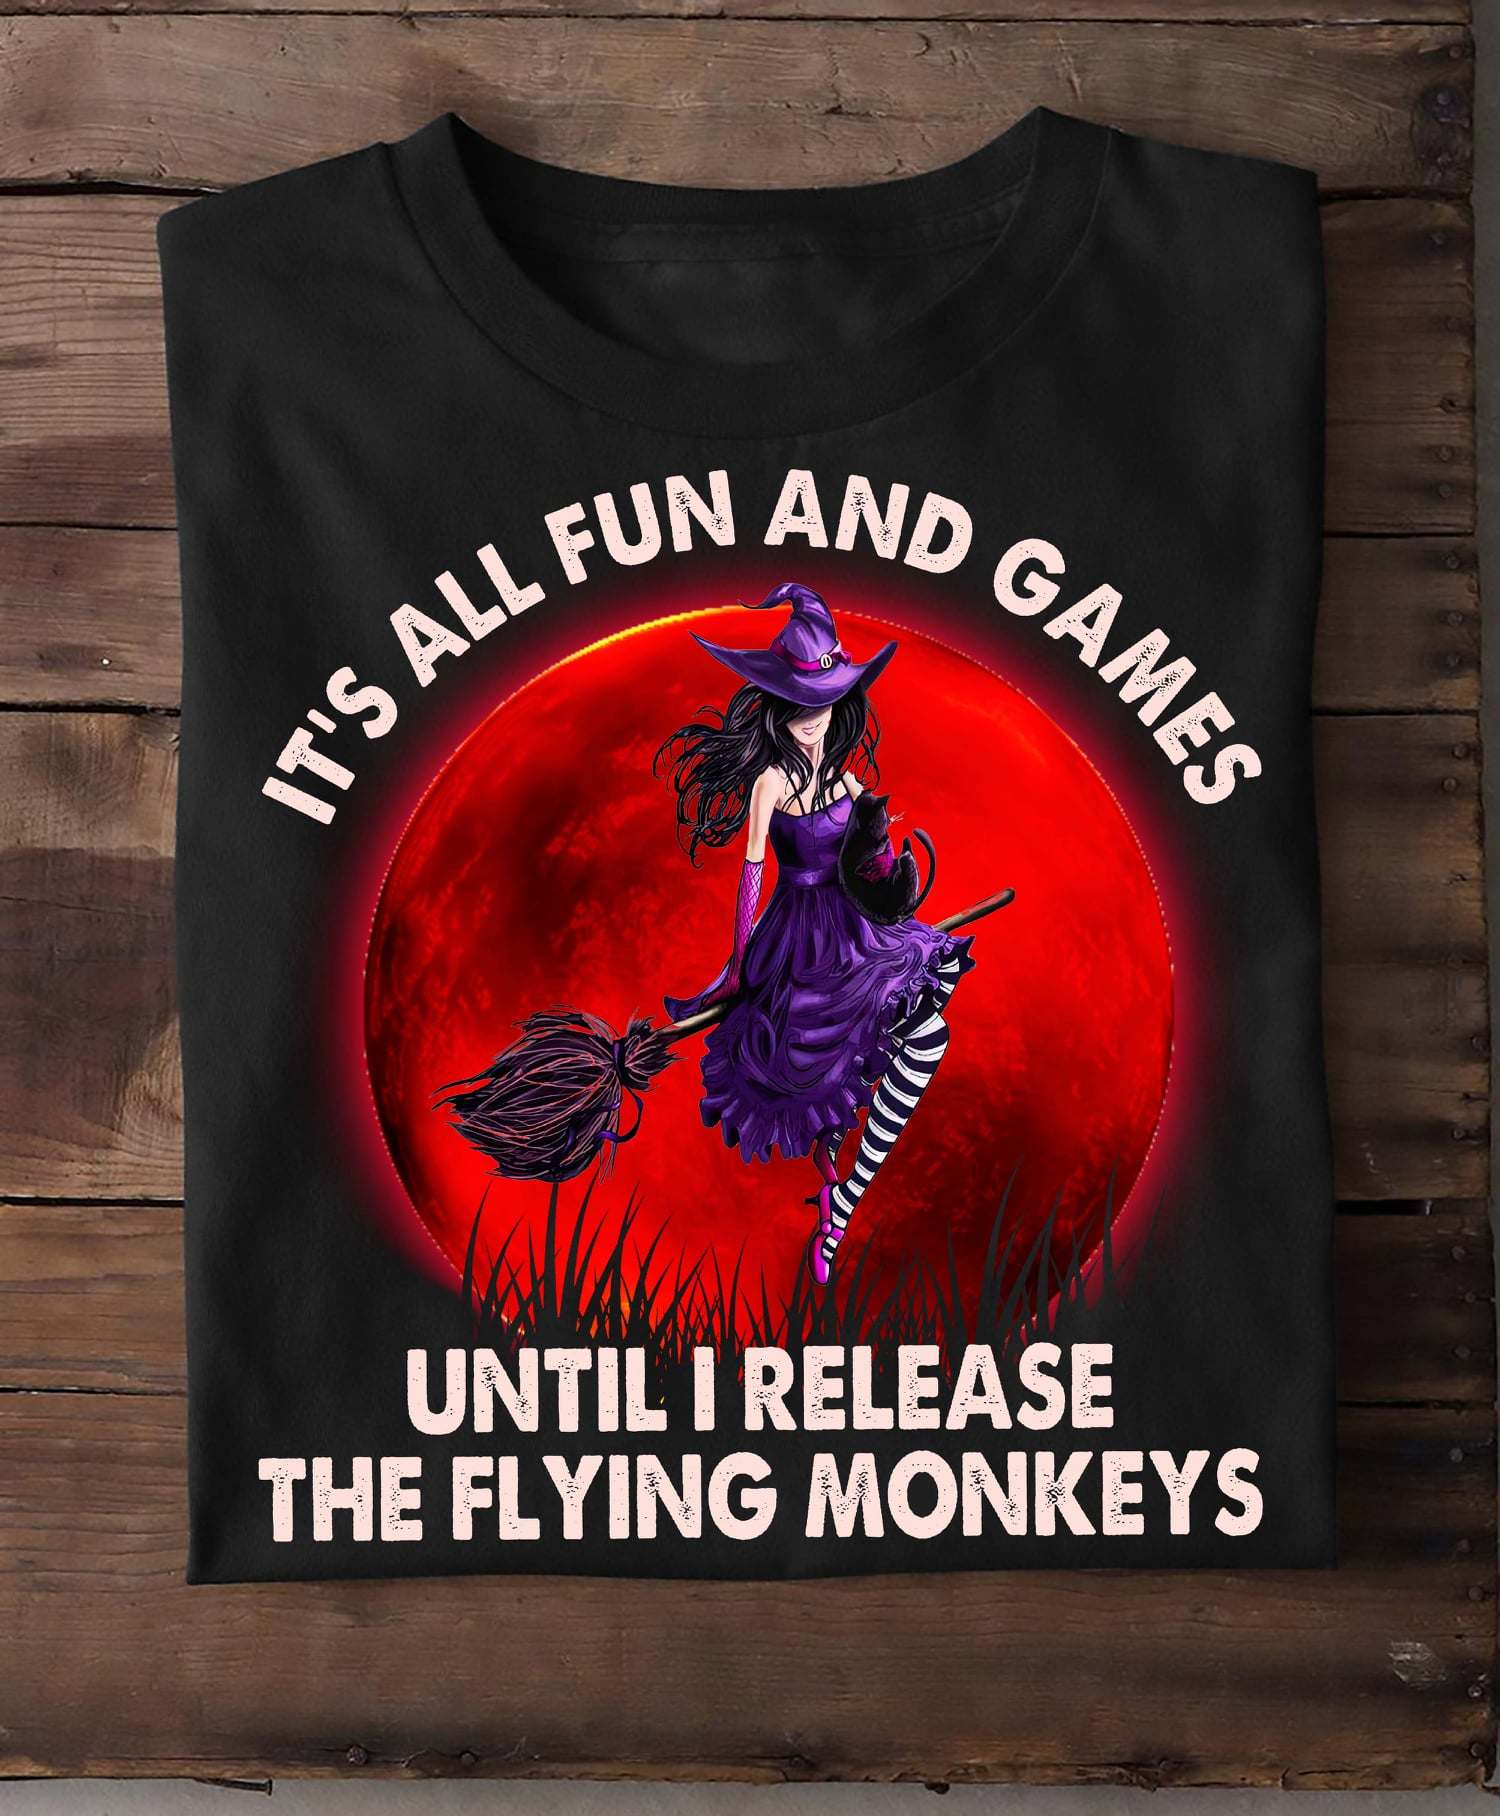 It's all fun and games until I realease the flying monkeys - Halloween witch